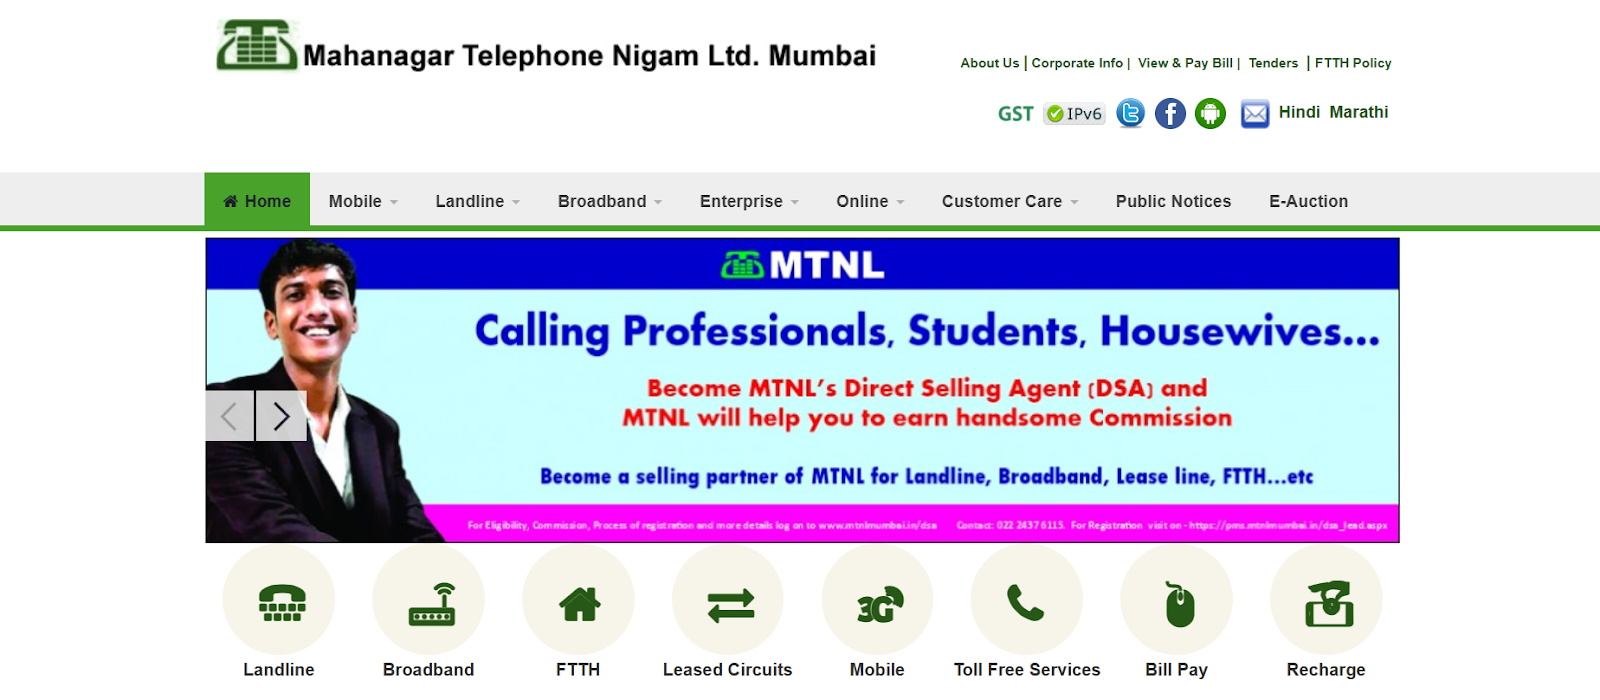 MTNL website snapshot highlighting the services it provides.